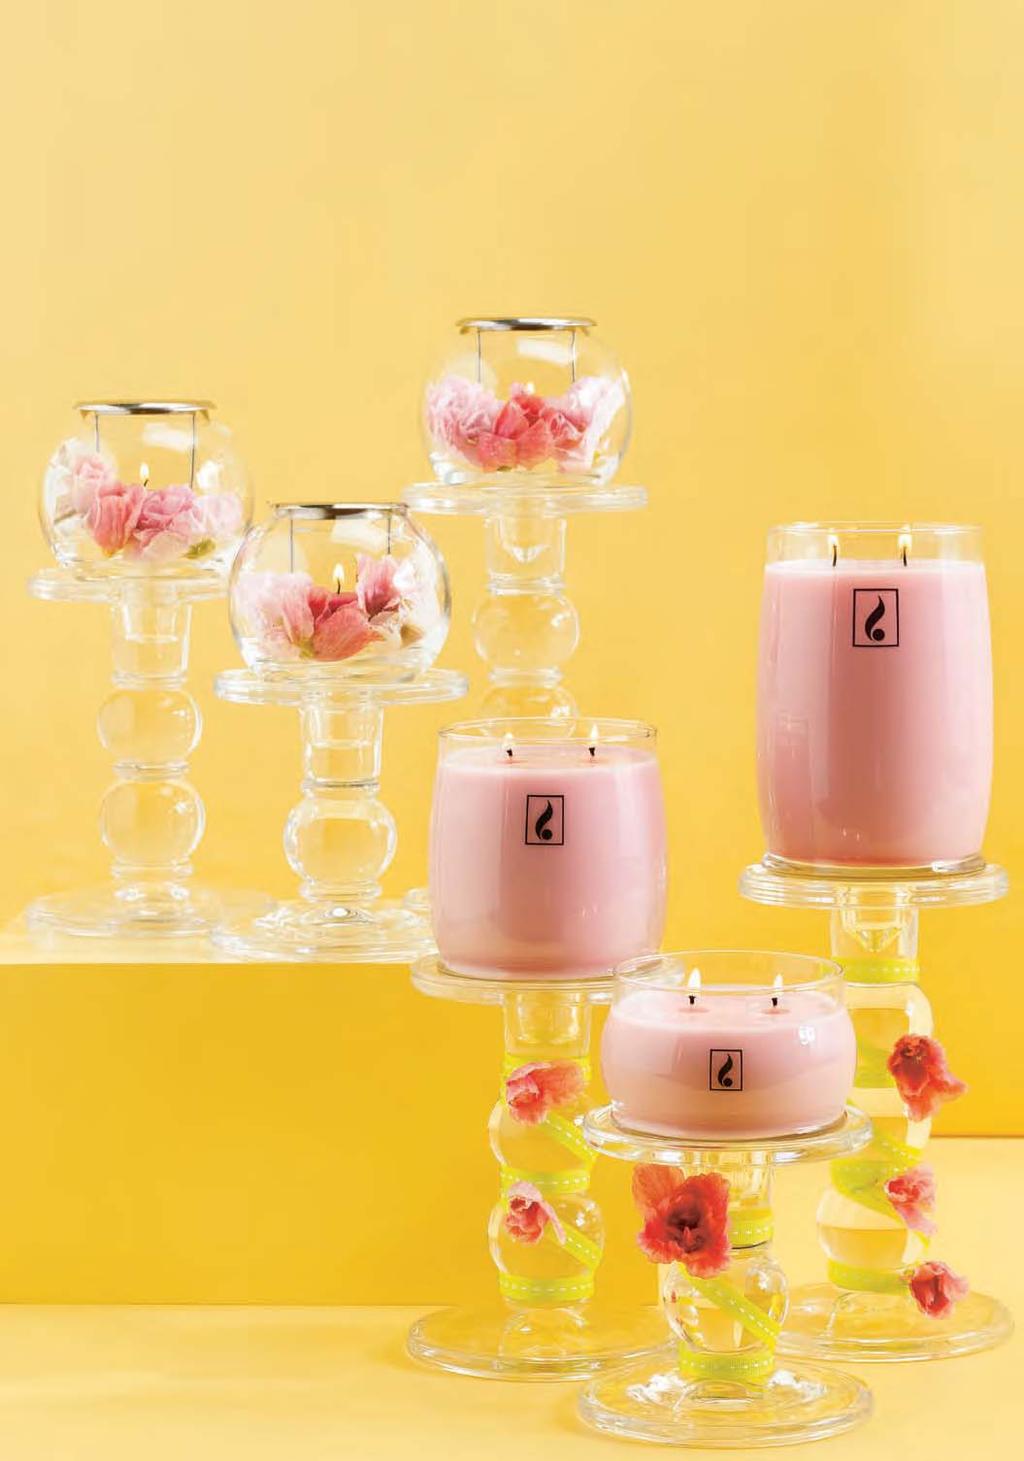 the most Design for your Design in more ways than one. VERSATILE holders adapt to your décor. CHANGE them EVERY SEASON. SUSPENDED TEALIGHT GLASS Mouth-blown glass.